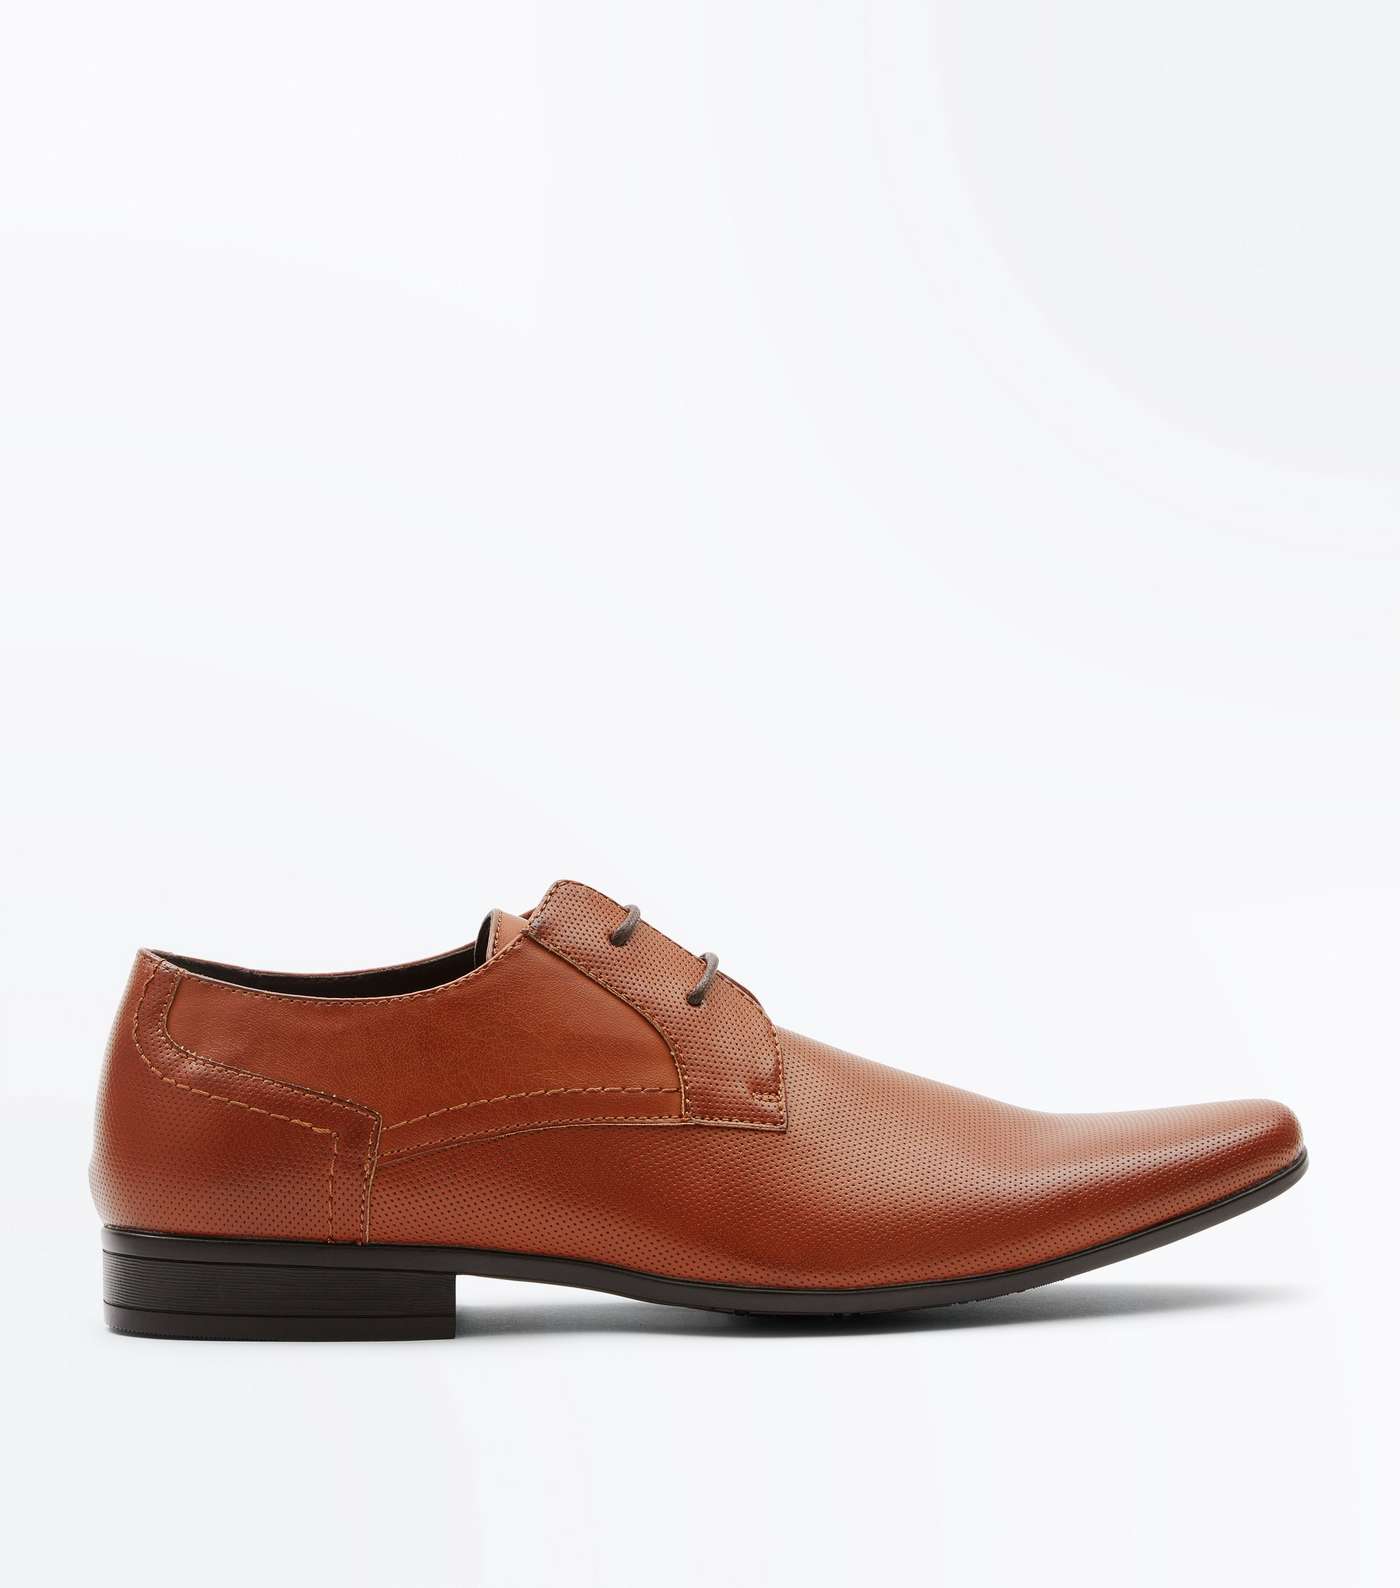 Tan Perforated Formal Shoes